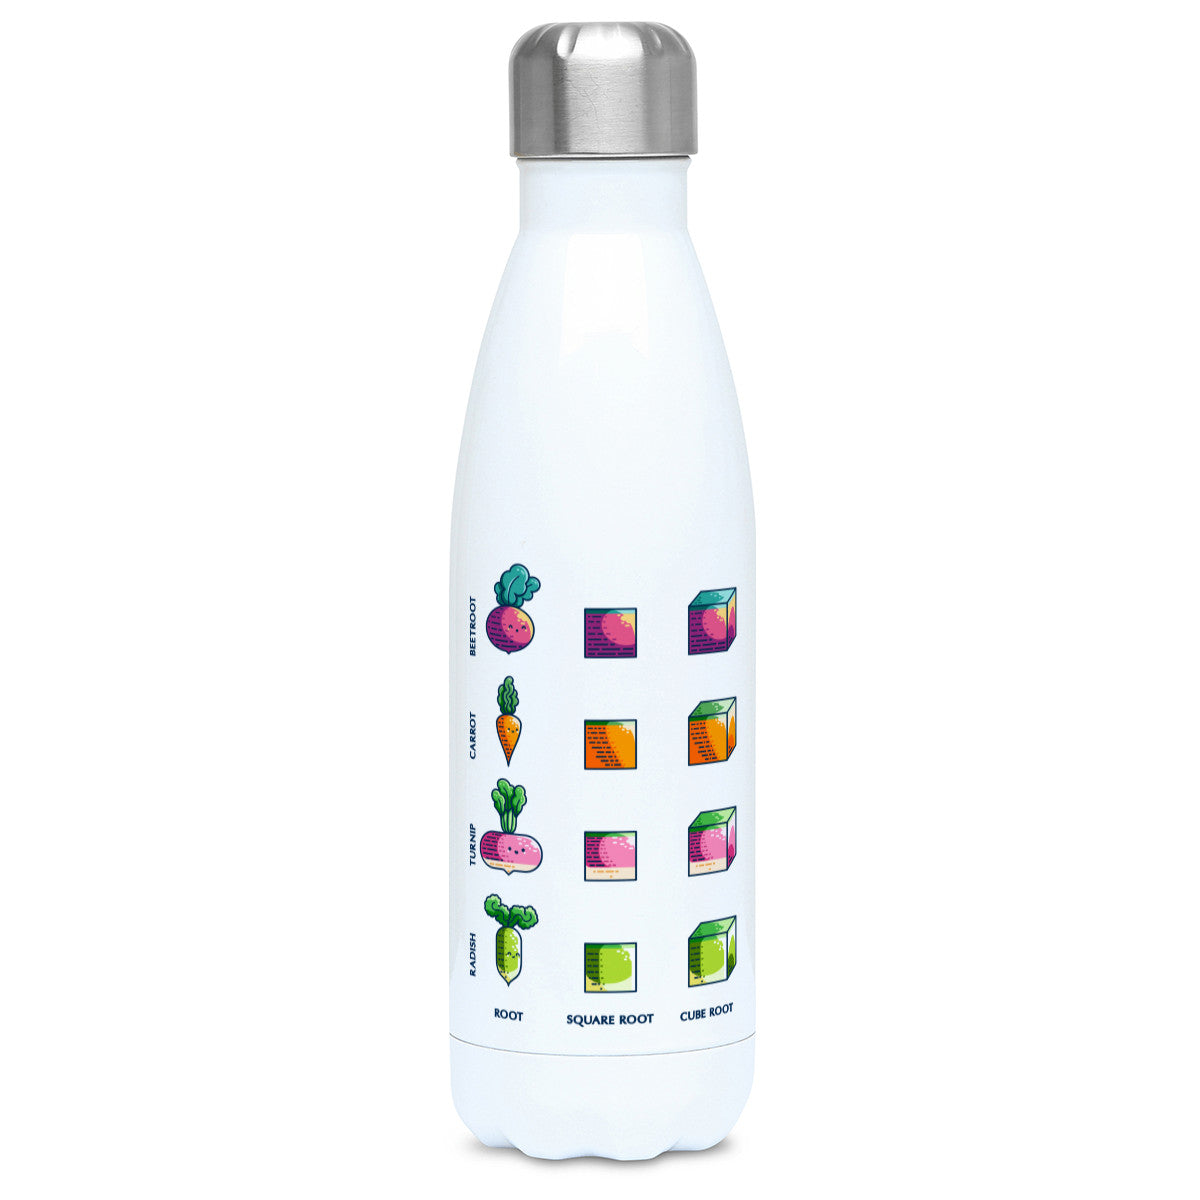 A tall white stainless steel drinks bottle seen from the front with its silver lid on and printed with a design of a labelled grid of beetroot, carrot, turnip and radish as roots with square root and cube root.